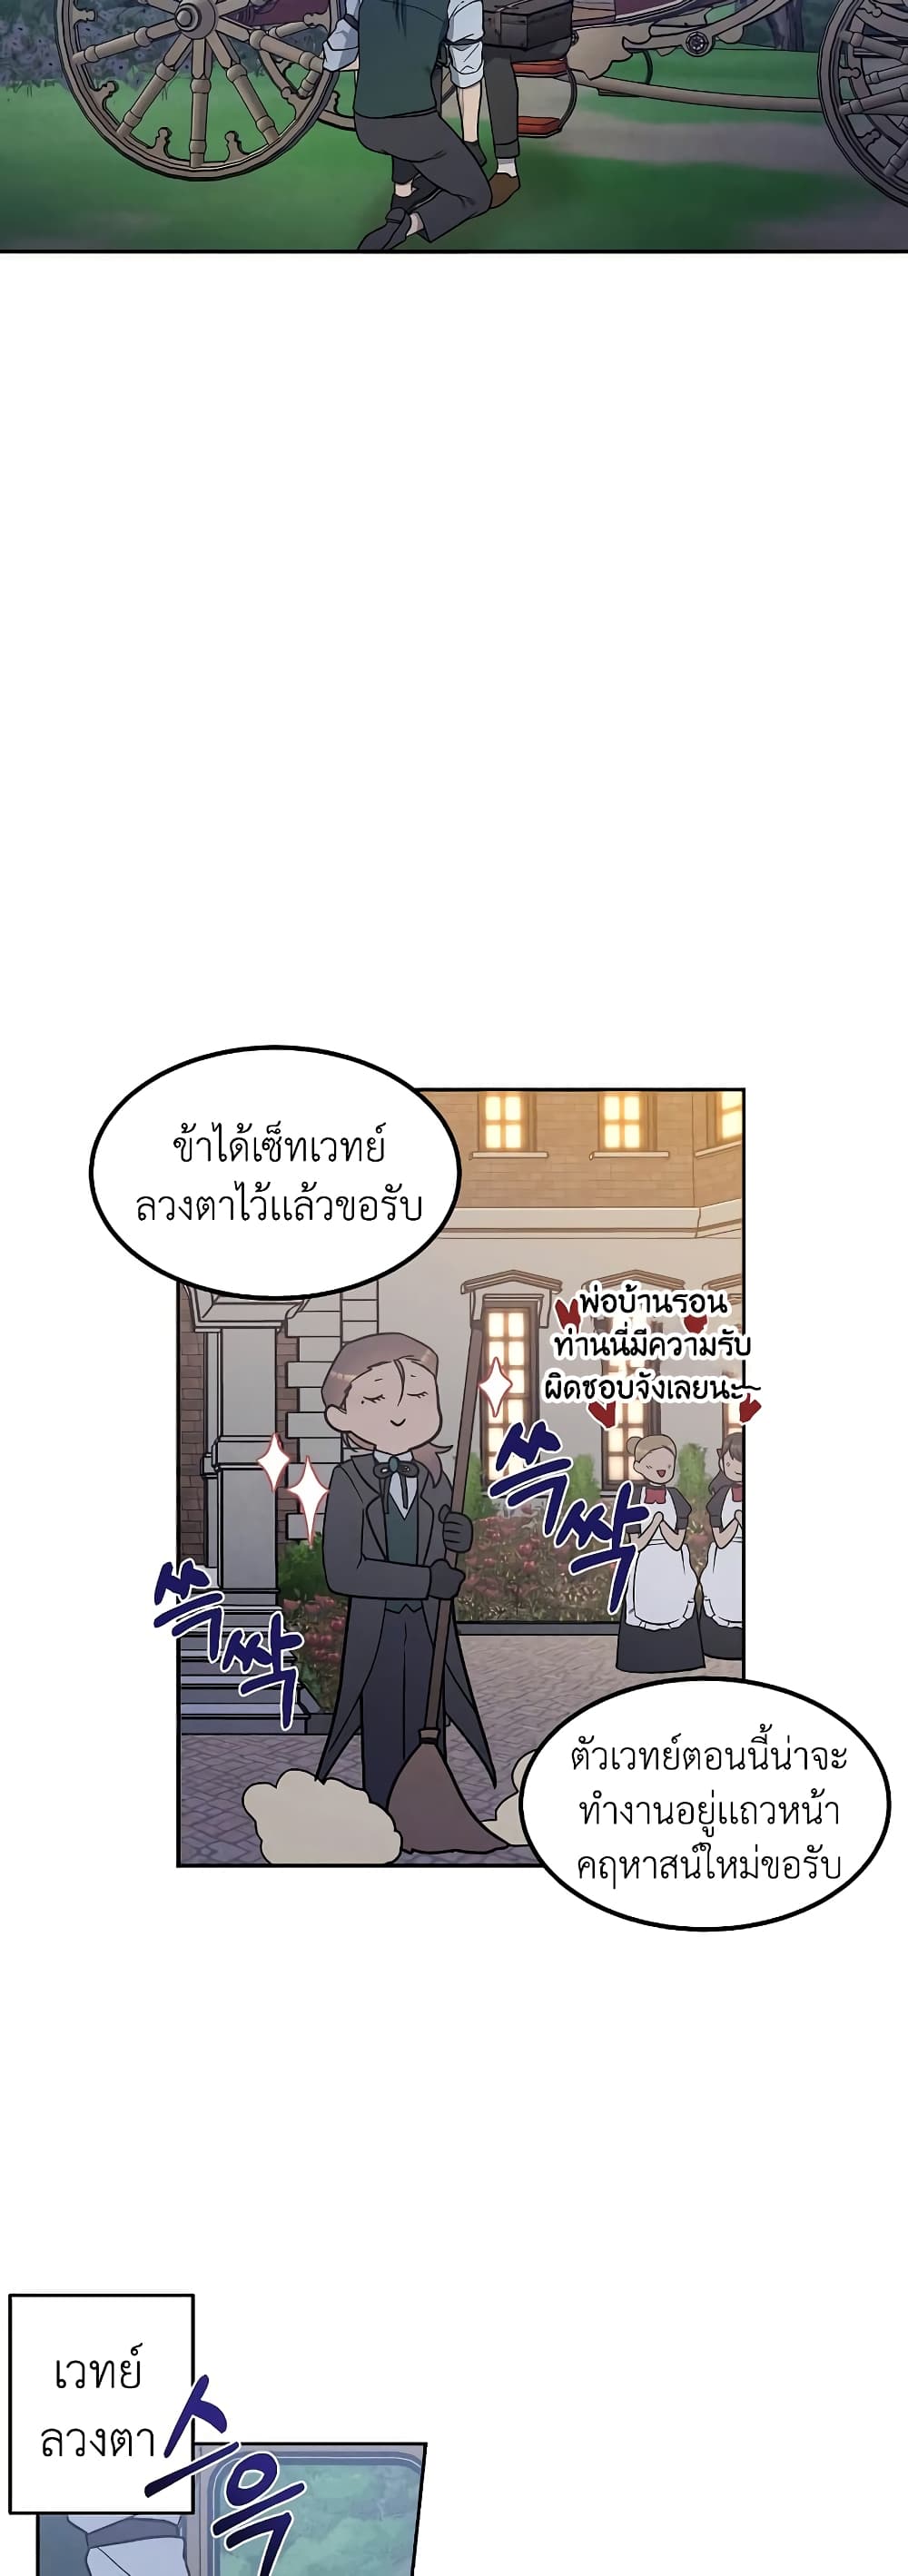 Legendary Youngest Son of the Marquis House 19 แปลไทย